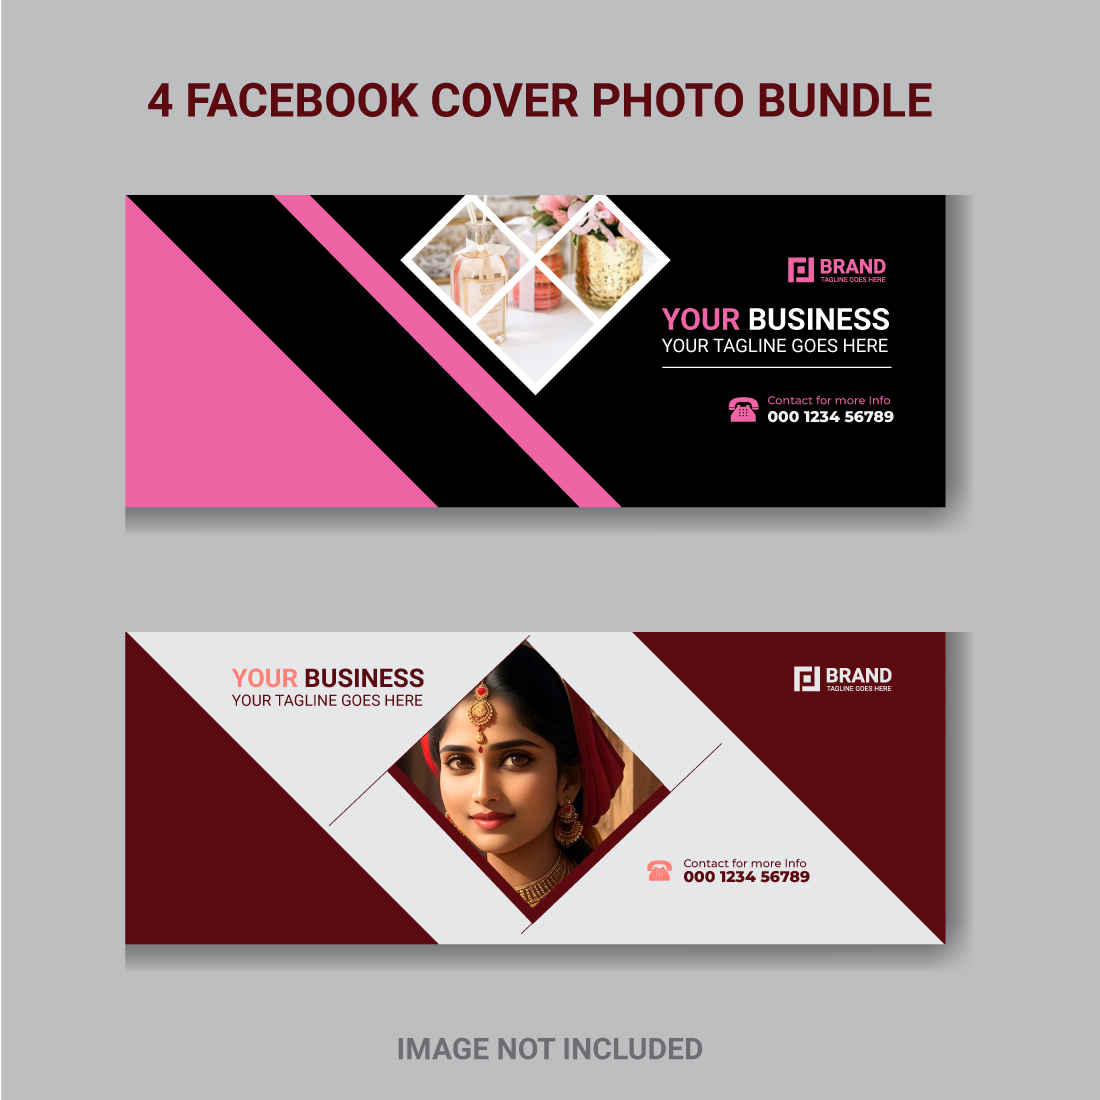 4 Facebook cover photo master bundle your business preview image.